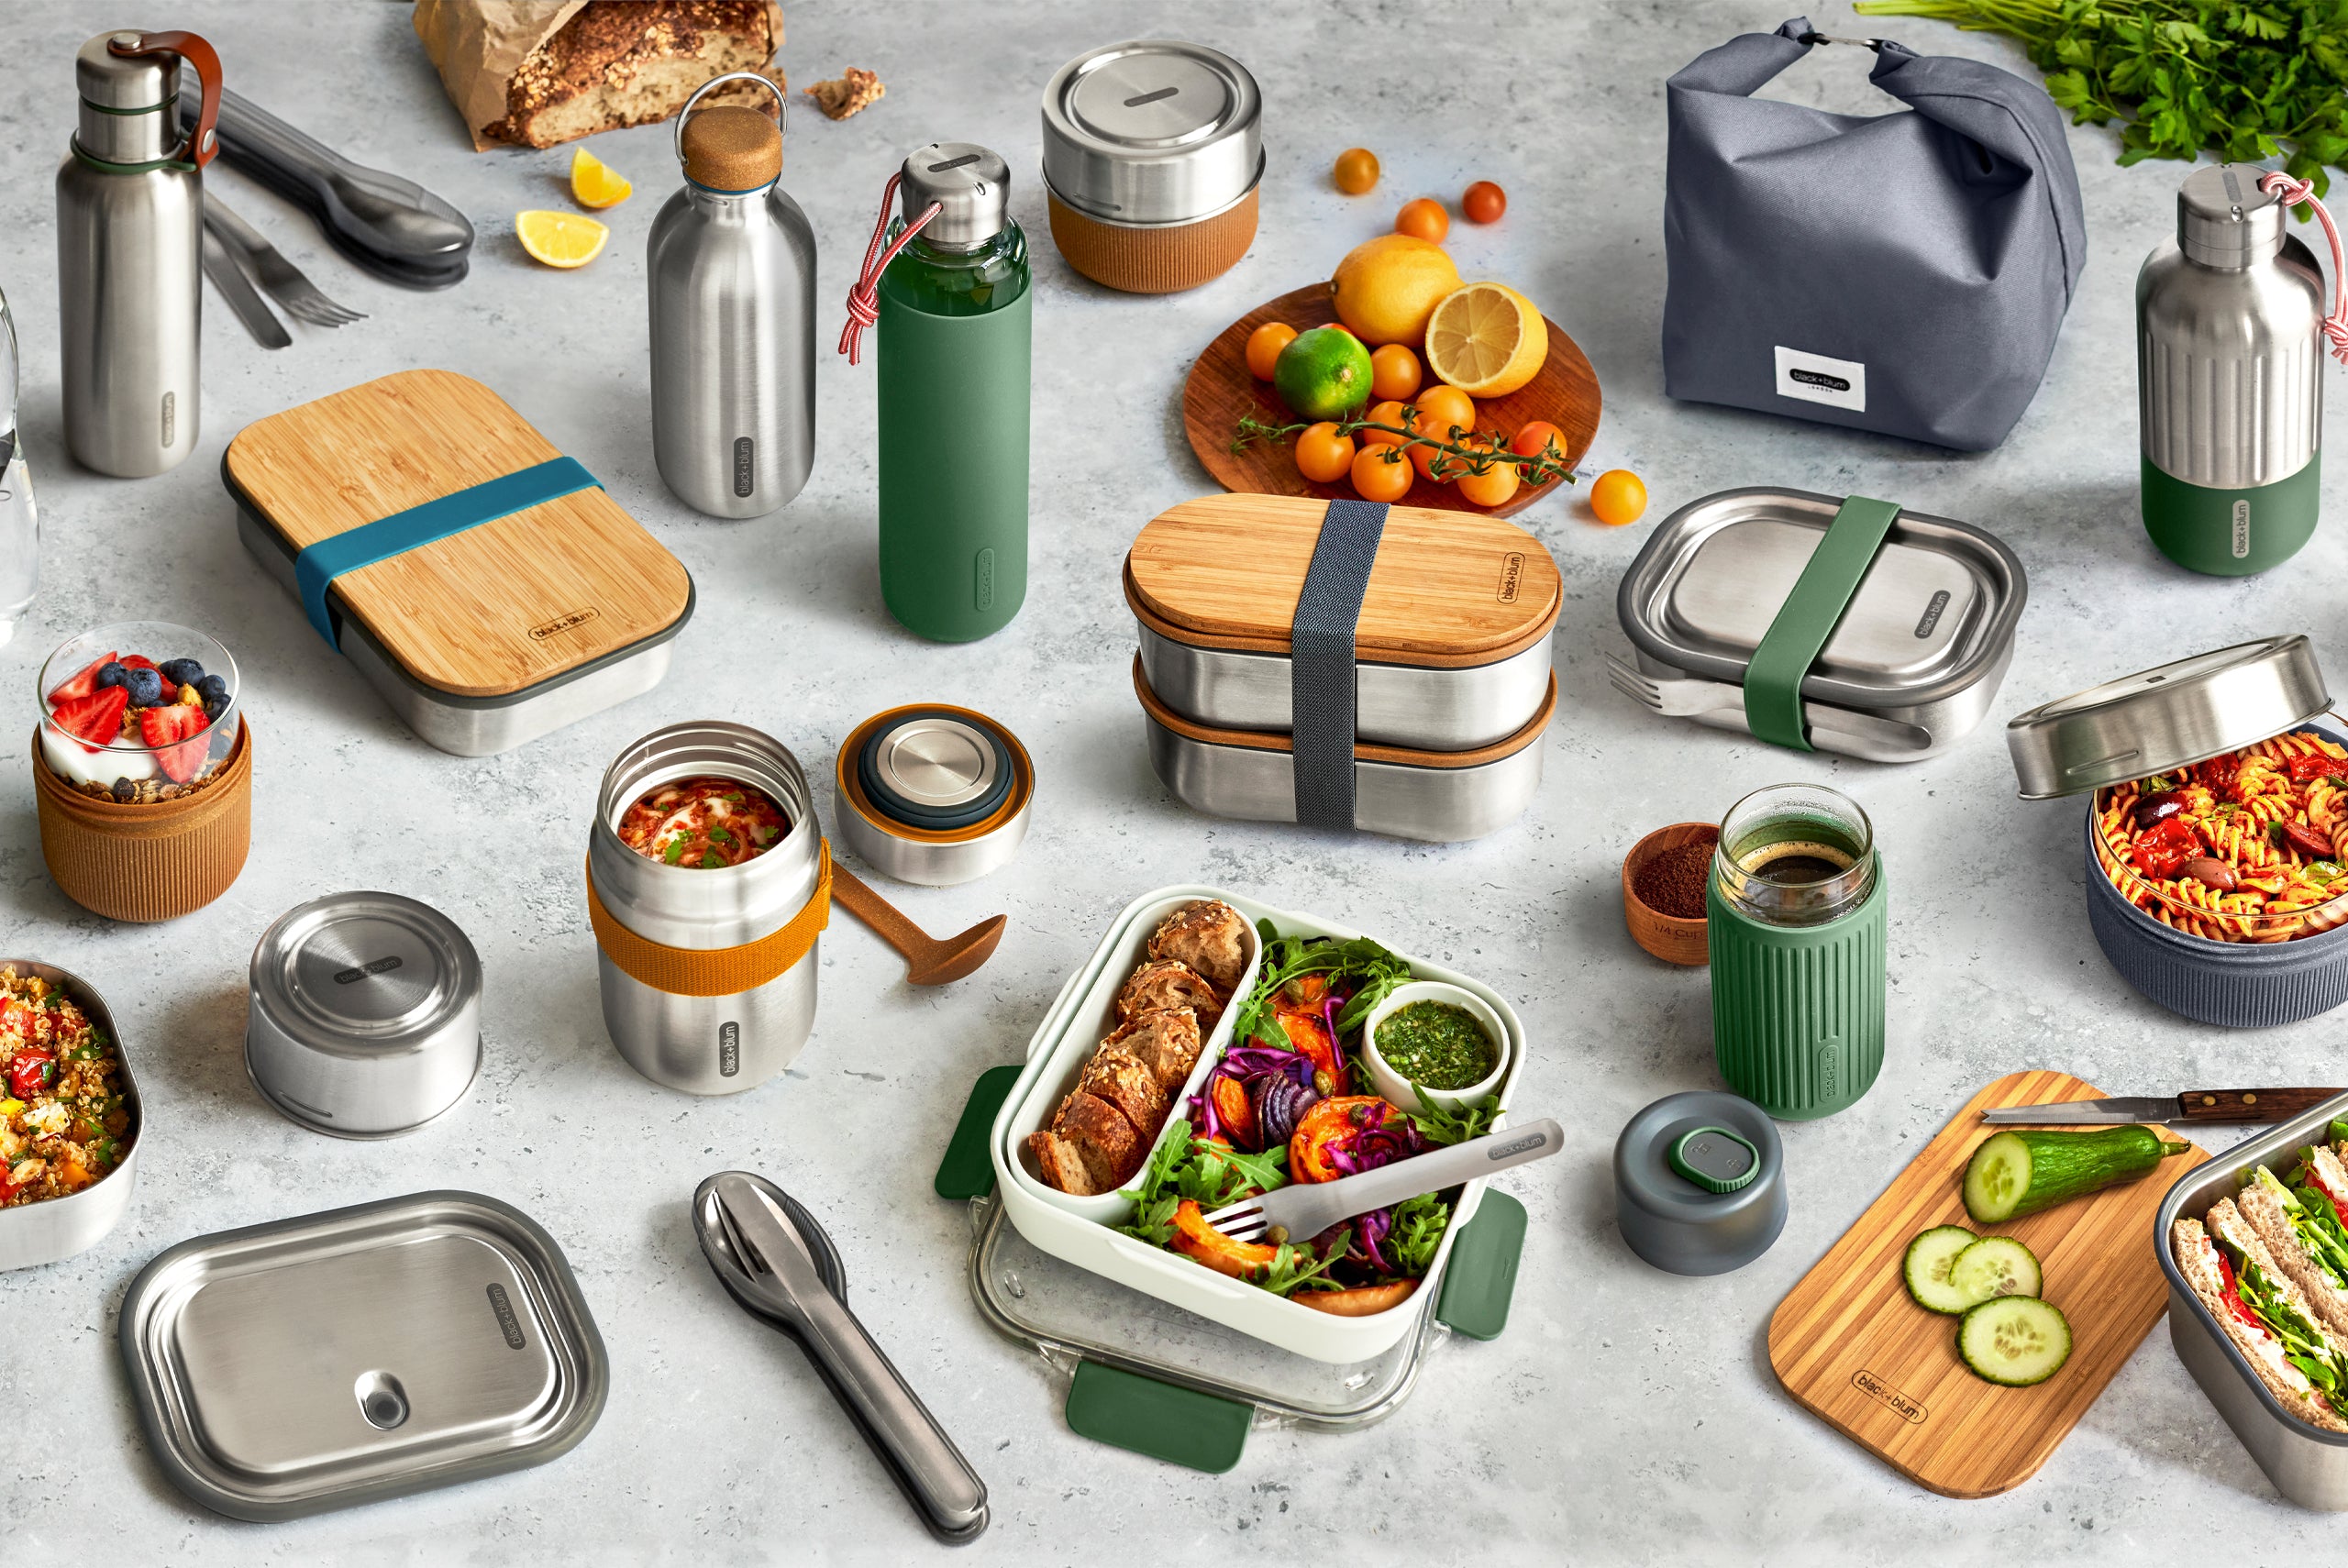 Black+Blum range of reusable and environmentally friendly food and drink products